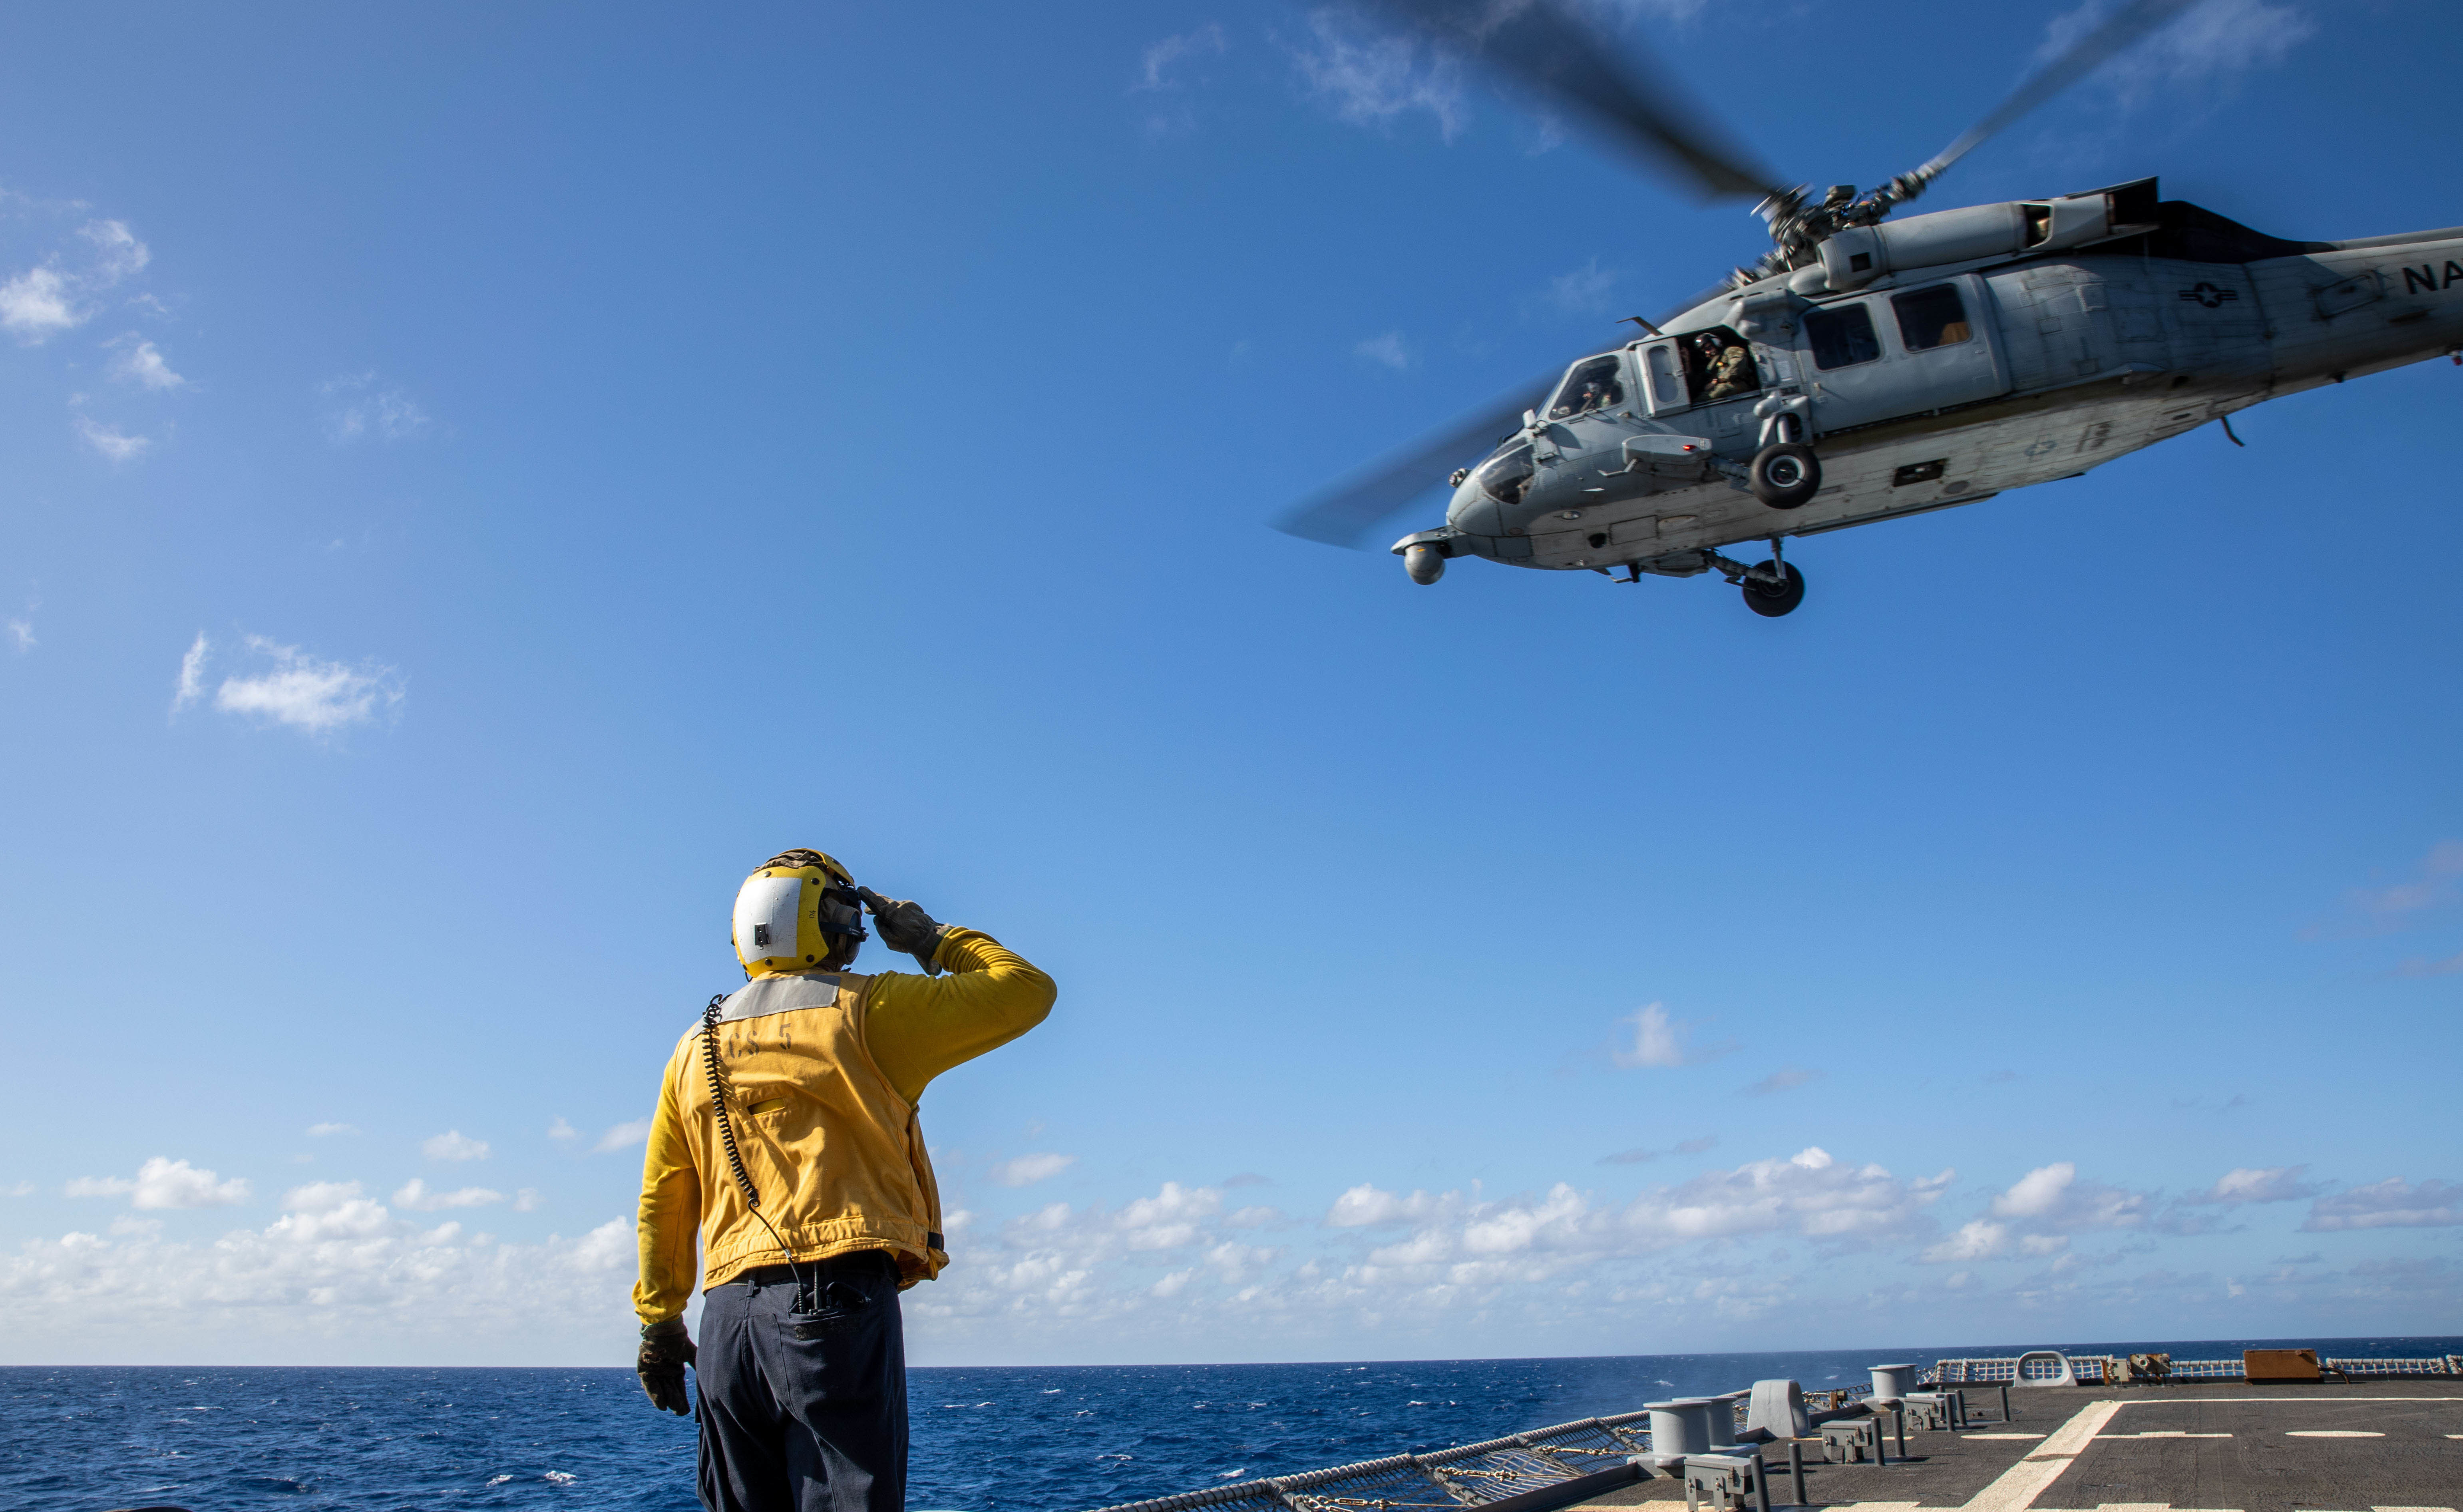 Boatswain’s Mate 2nd Class James Dowdee salutes the pilots in an MH-60S Sea Hawk helicopter assigned to the “Sea Knights” of Helicopter Sea Combat Squadron (HSC) 22, Detachment 5, as it flies above the Freedom-variant littoral combat ship USS Milwaukee (LCS 5).